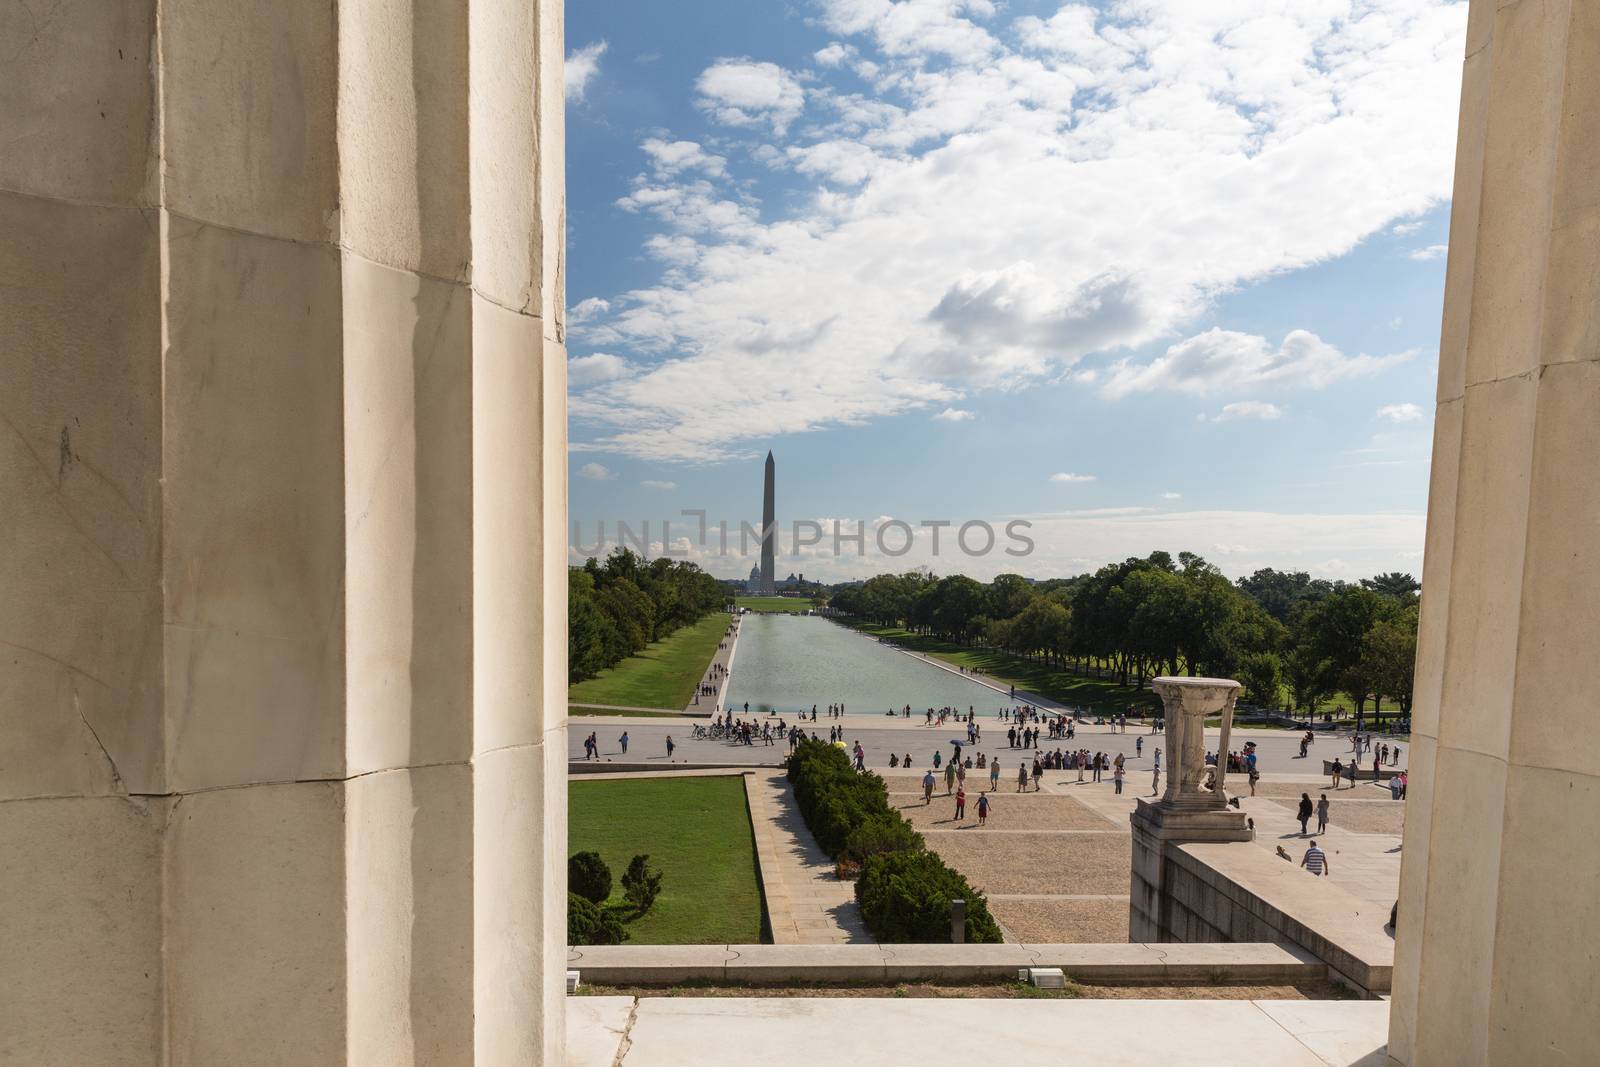 The view through the columns of the Lincoln Memorial by chrisukphoto